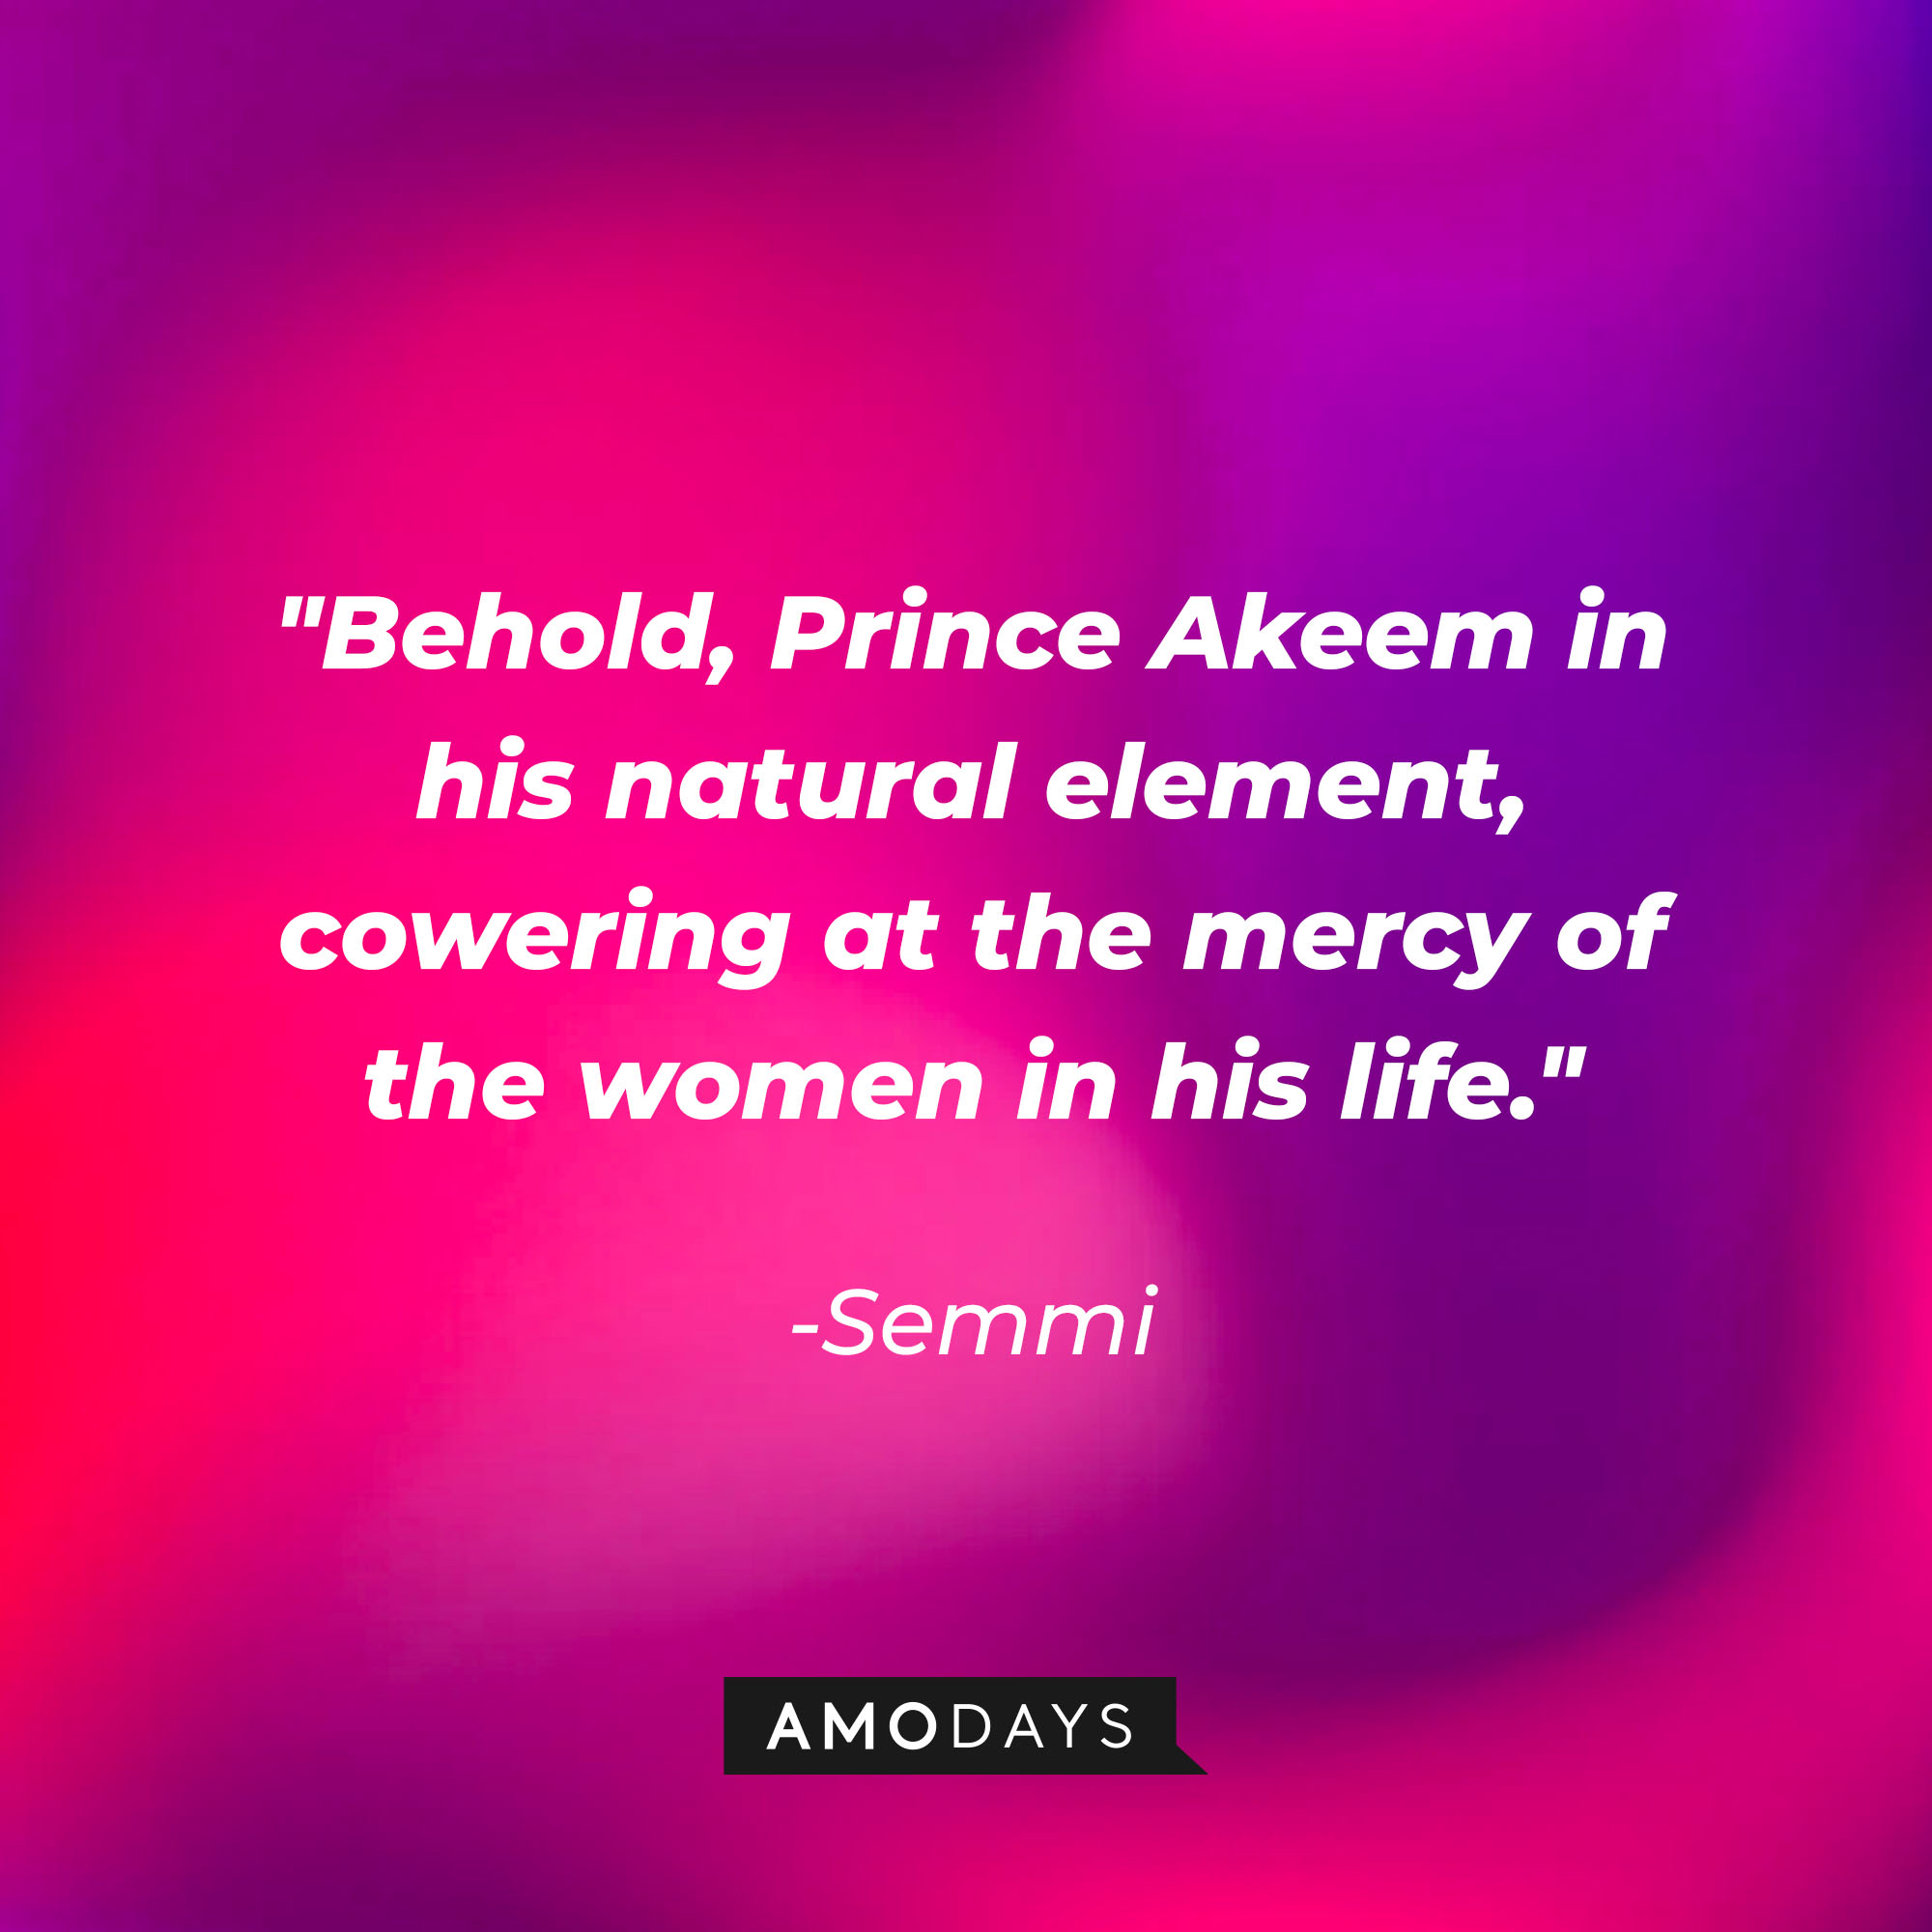 Semmi’s quote: "Behold, Prince Akeem in his natural element, cowering at the mercy of the women in his life." | Source: AmoDays